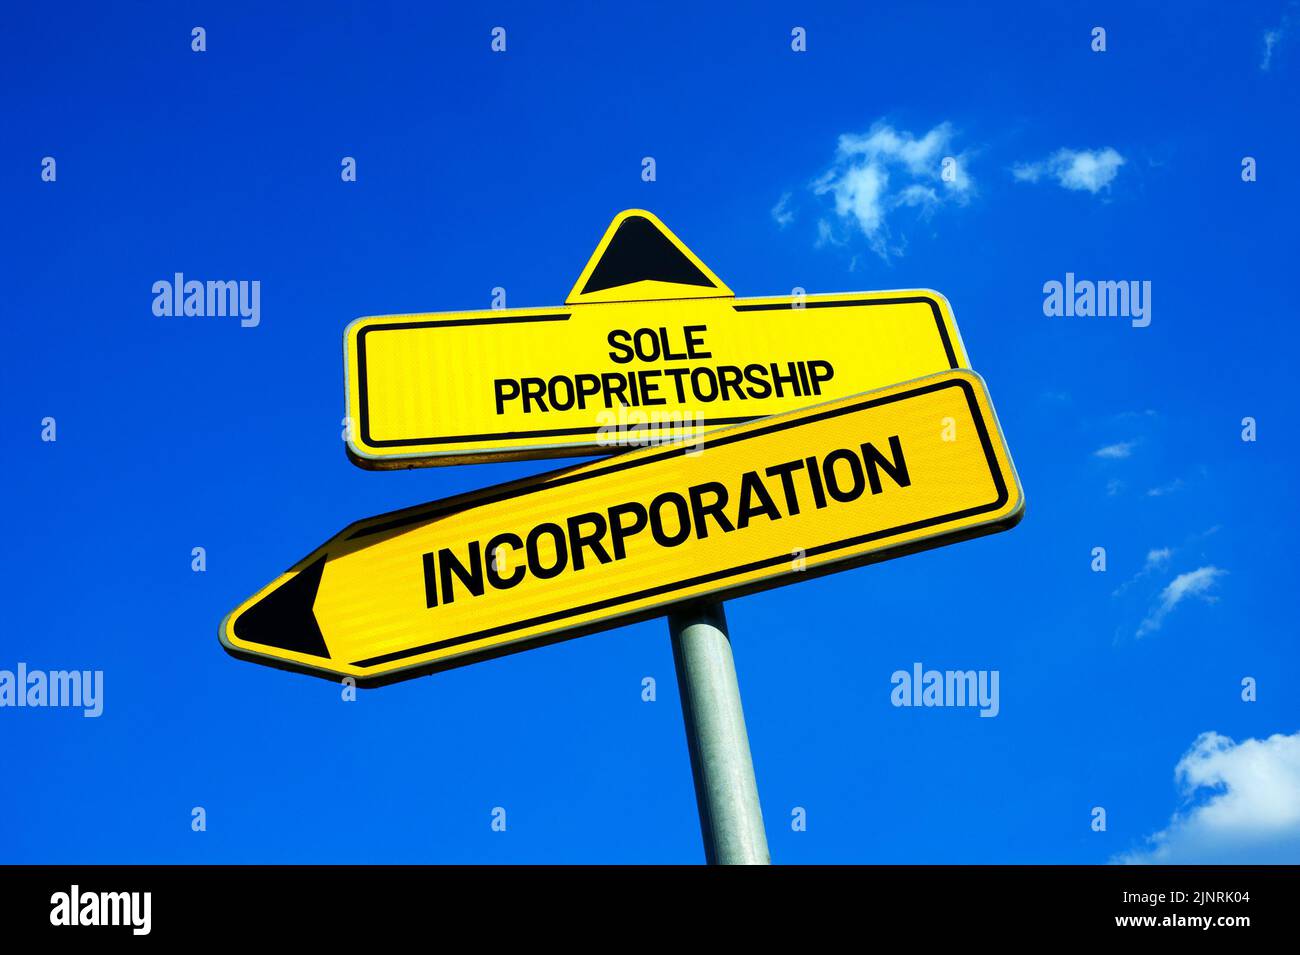 Sole proprietorship vs Incorporation - Traffic sign with two options - Choosing between two business and entrepeneurship structures. Choice and decisi Stock Photo